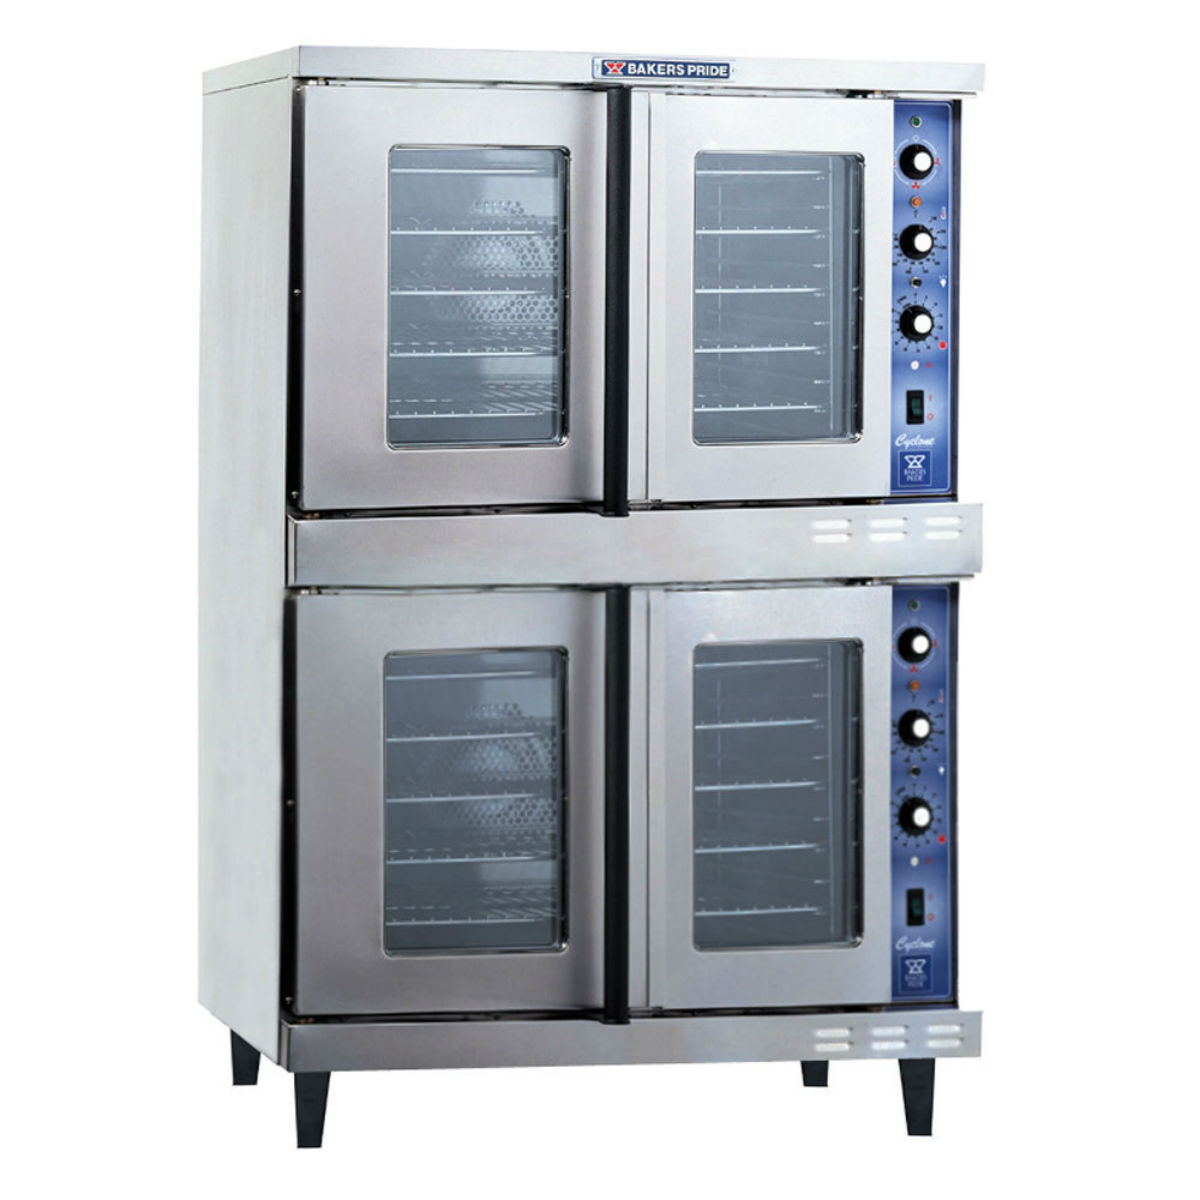 Used Commercial Bakery Ovens For Sale by Owner - No Fees.